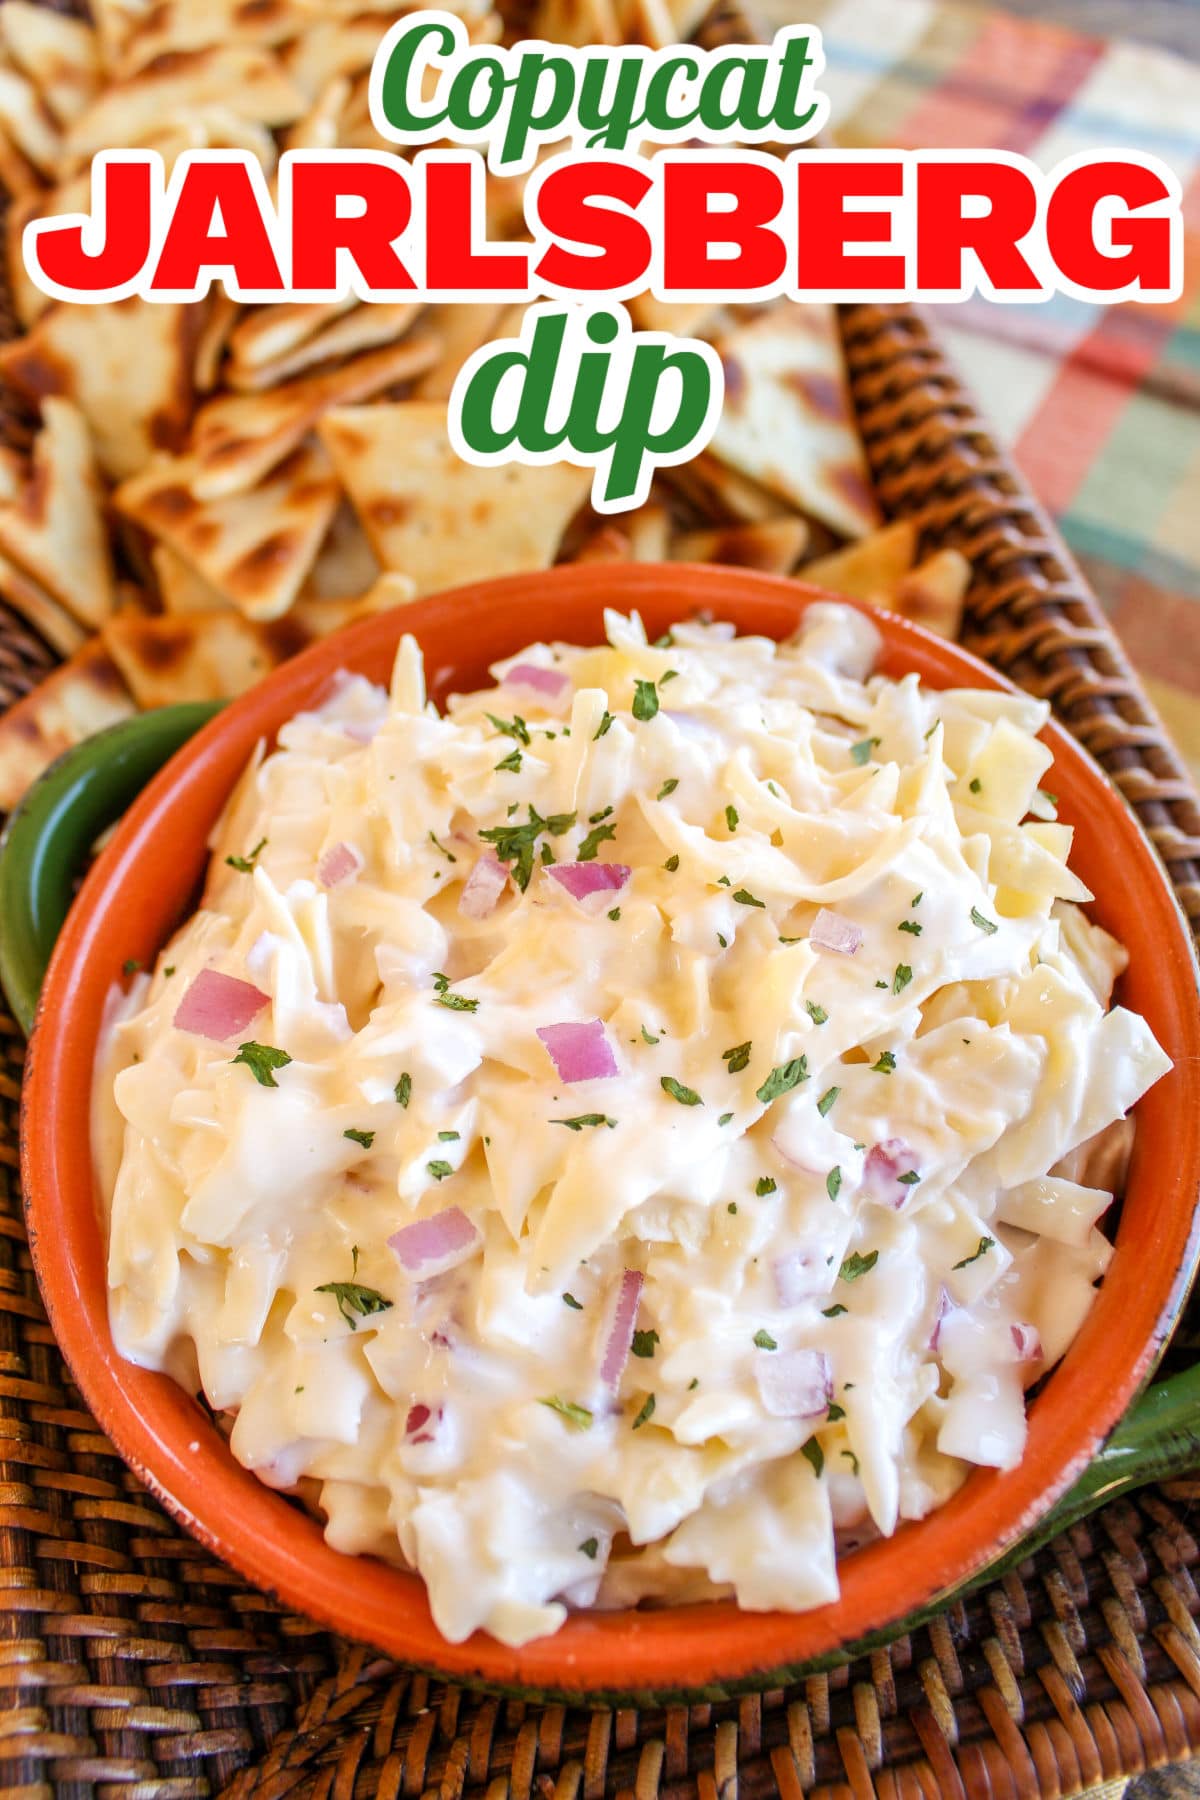 This delicious Jarlsberg cheese dip recipe comes from a family favorite cookbook! This cheese dip is so tasty and creamy, you’ll have a hard time not eating the whole batch! If you love Jarlsberg cheese, then you will love this recipe. It’s easy to prepare and perfect for parties, game day or anytime!  via @foodhussy